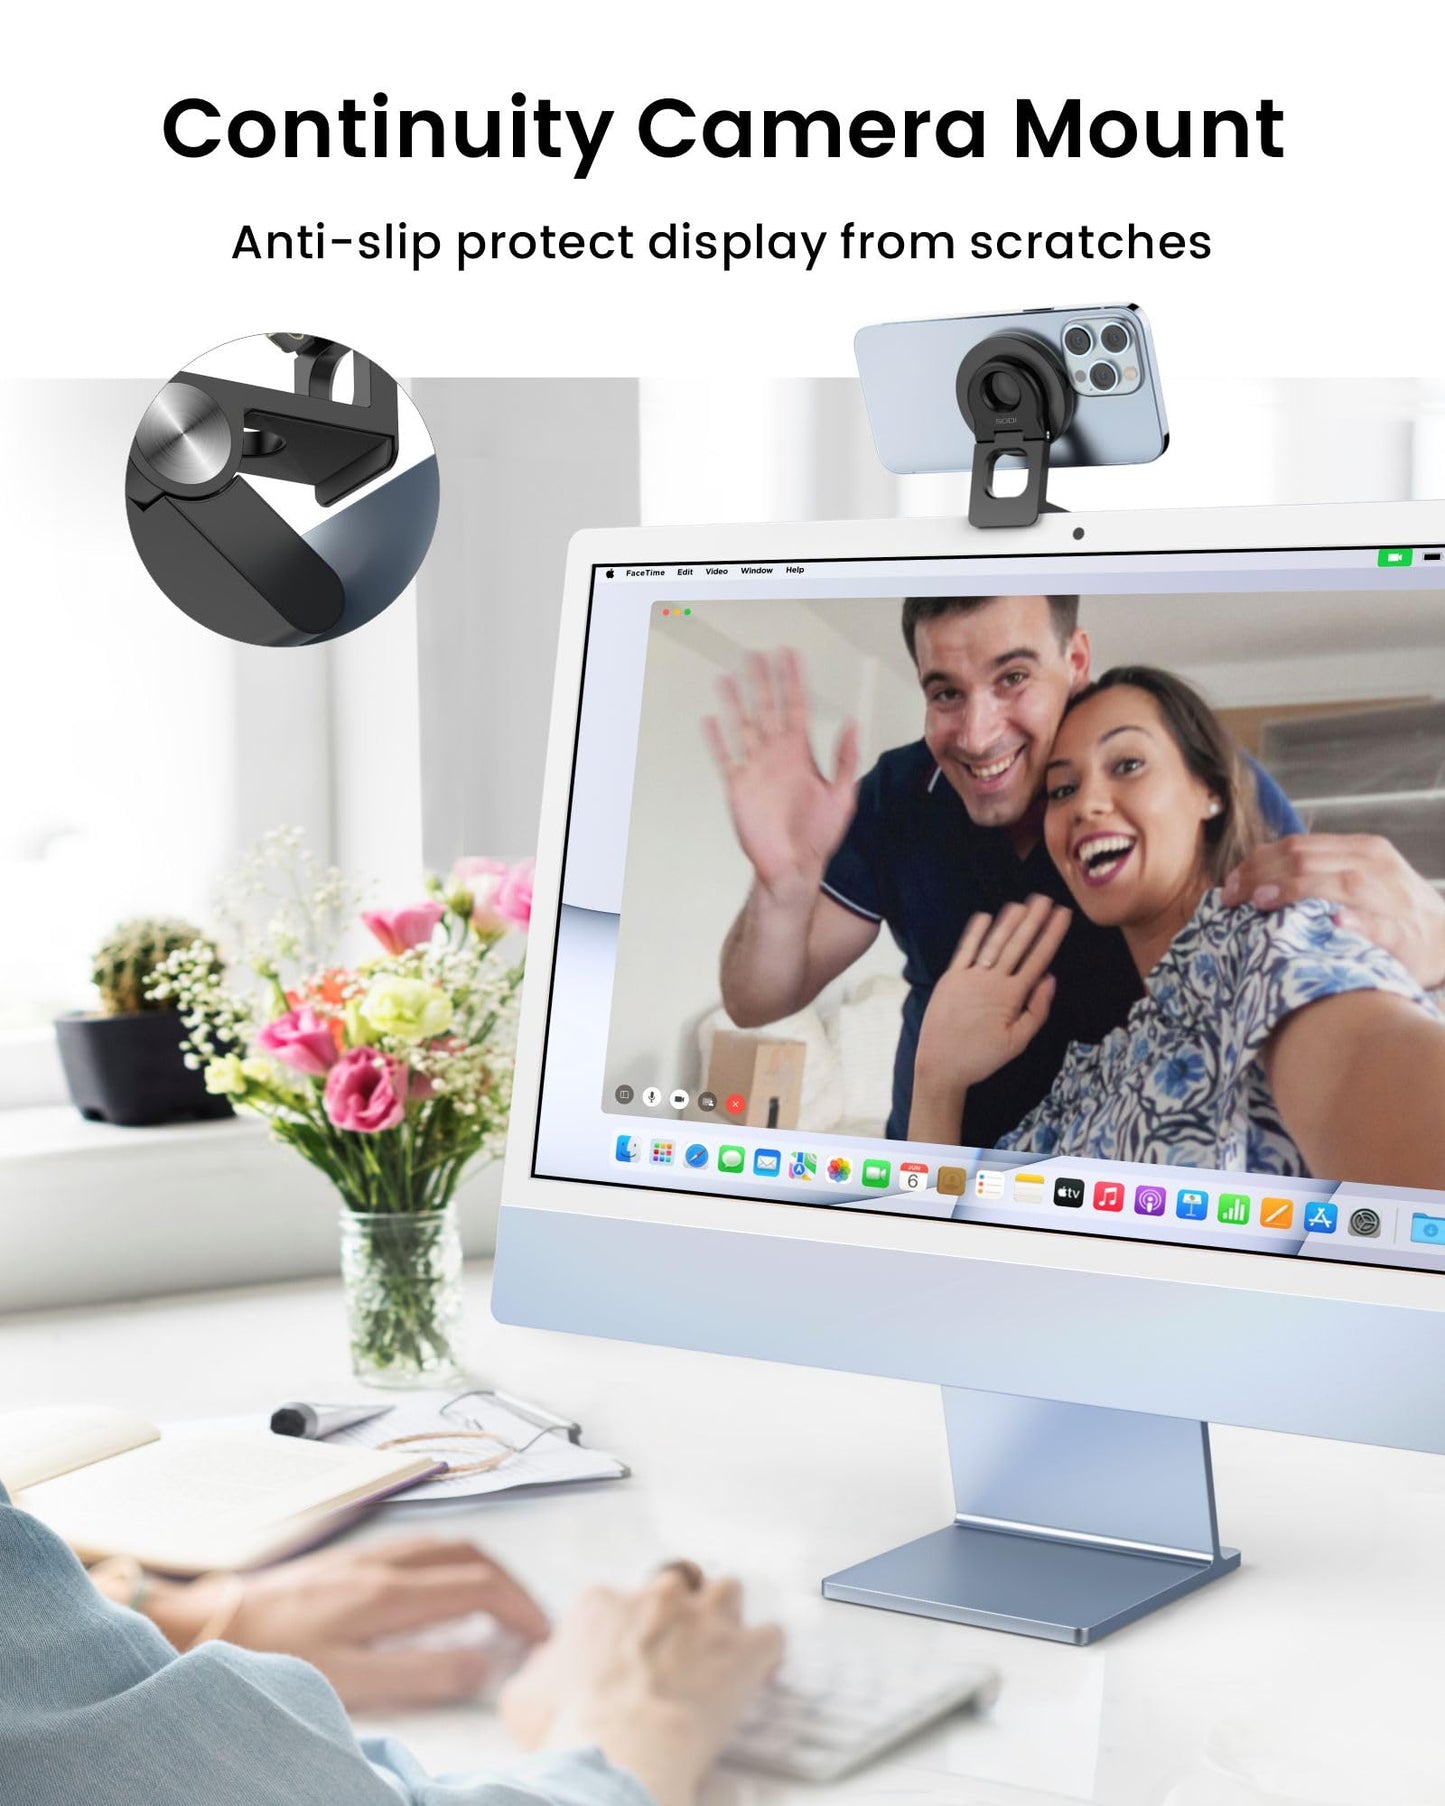 SODI Continuity Camera Mount for Desktop Monitor & iMac Compatible iPhone Webcam Mount with Mag-Safe for Mac and Displays, Mac OS Ventura, Work for Facetime, Desk View, Black